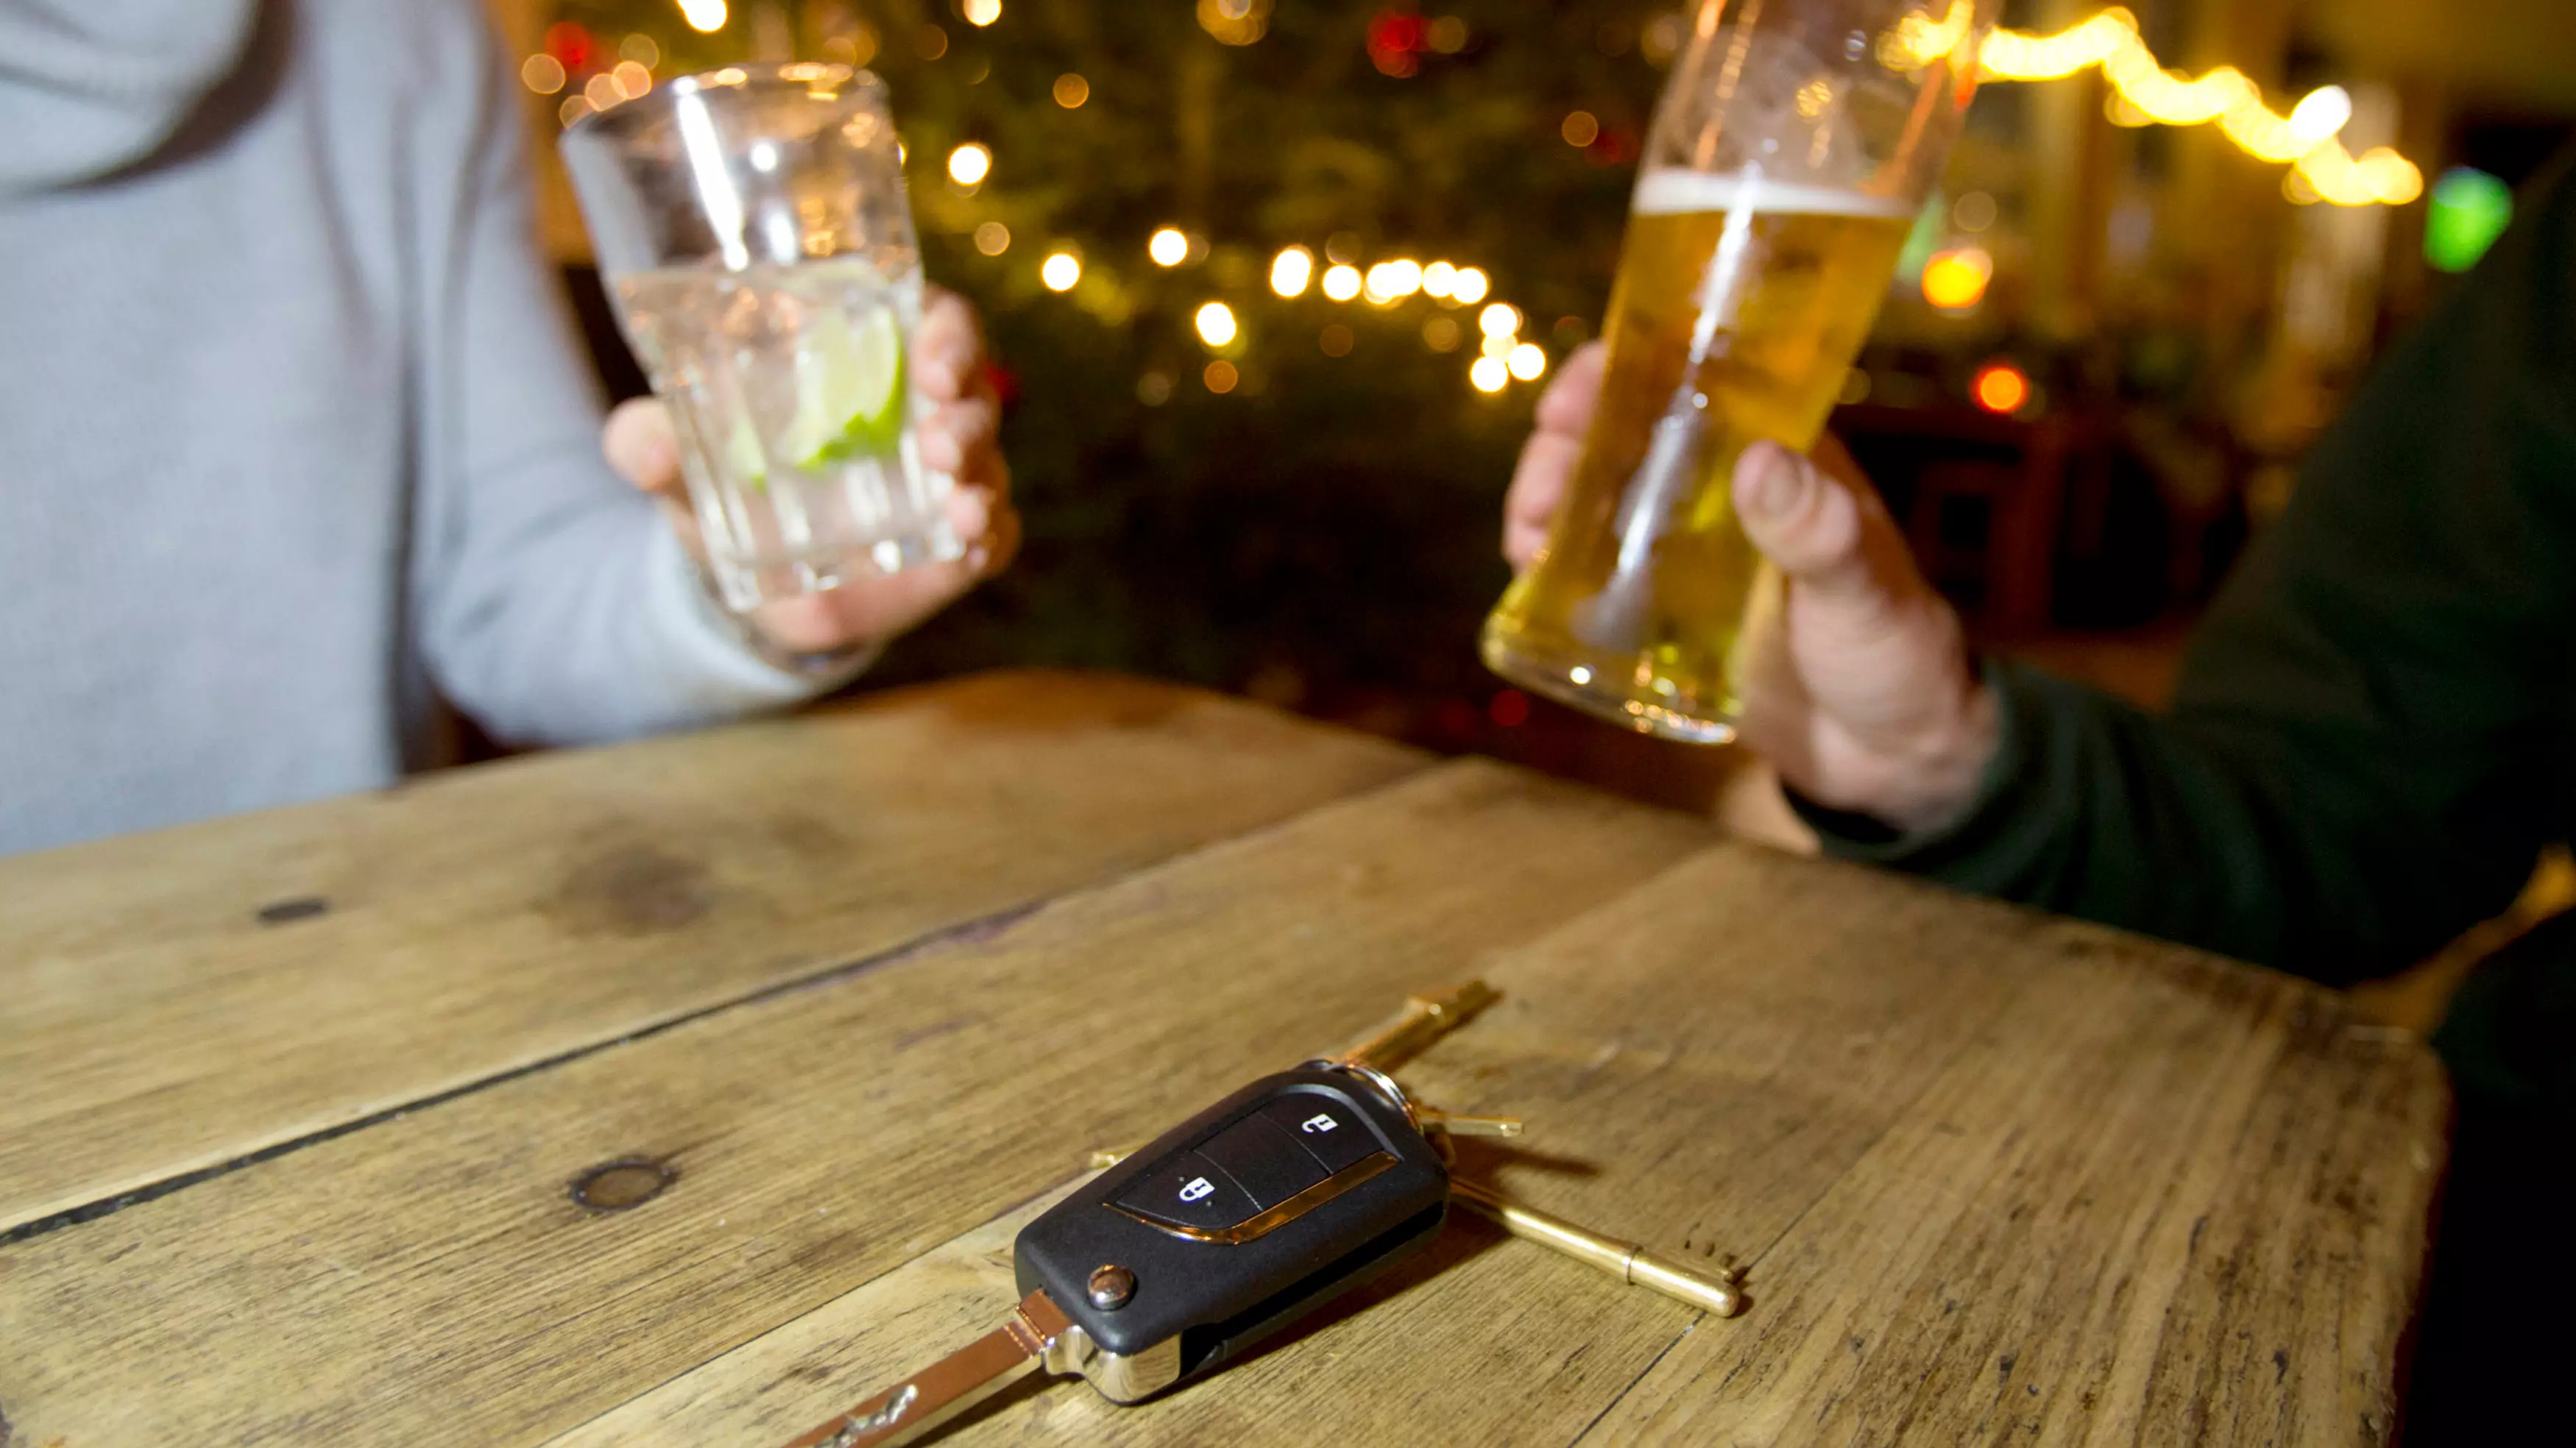 Greene King And Coca-Cola Offer Free Soft Drinks To Designated Drivers